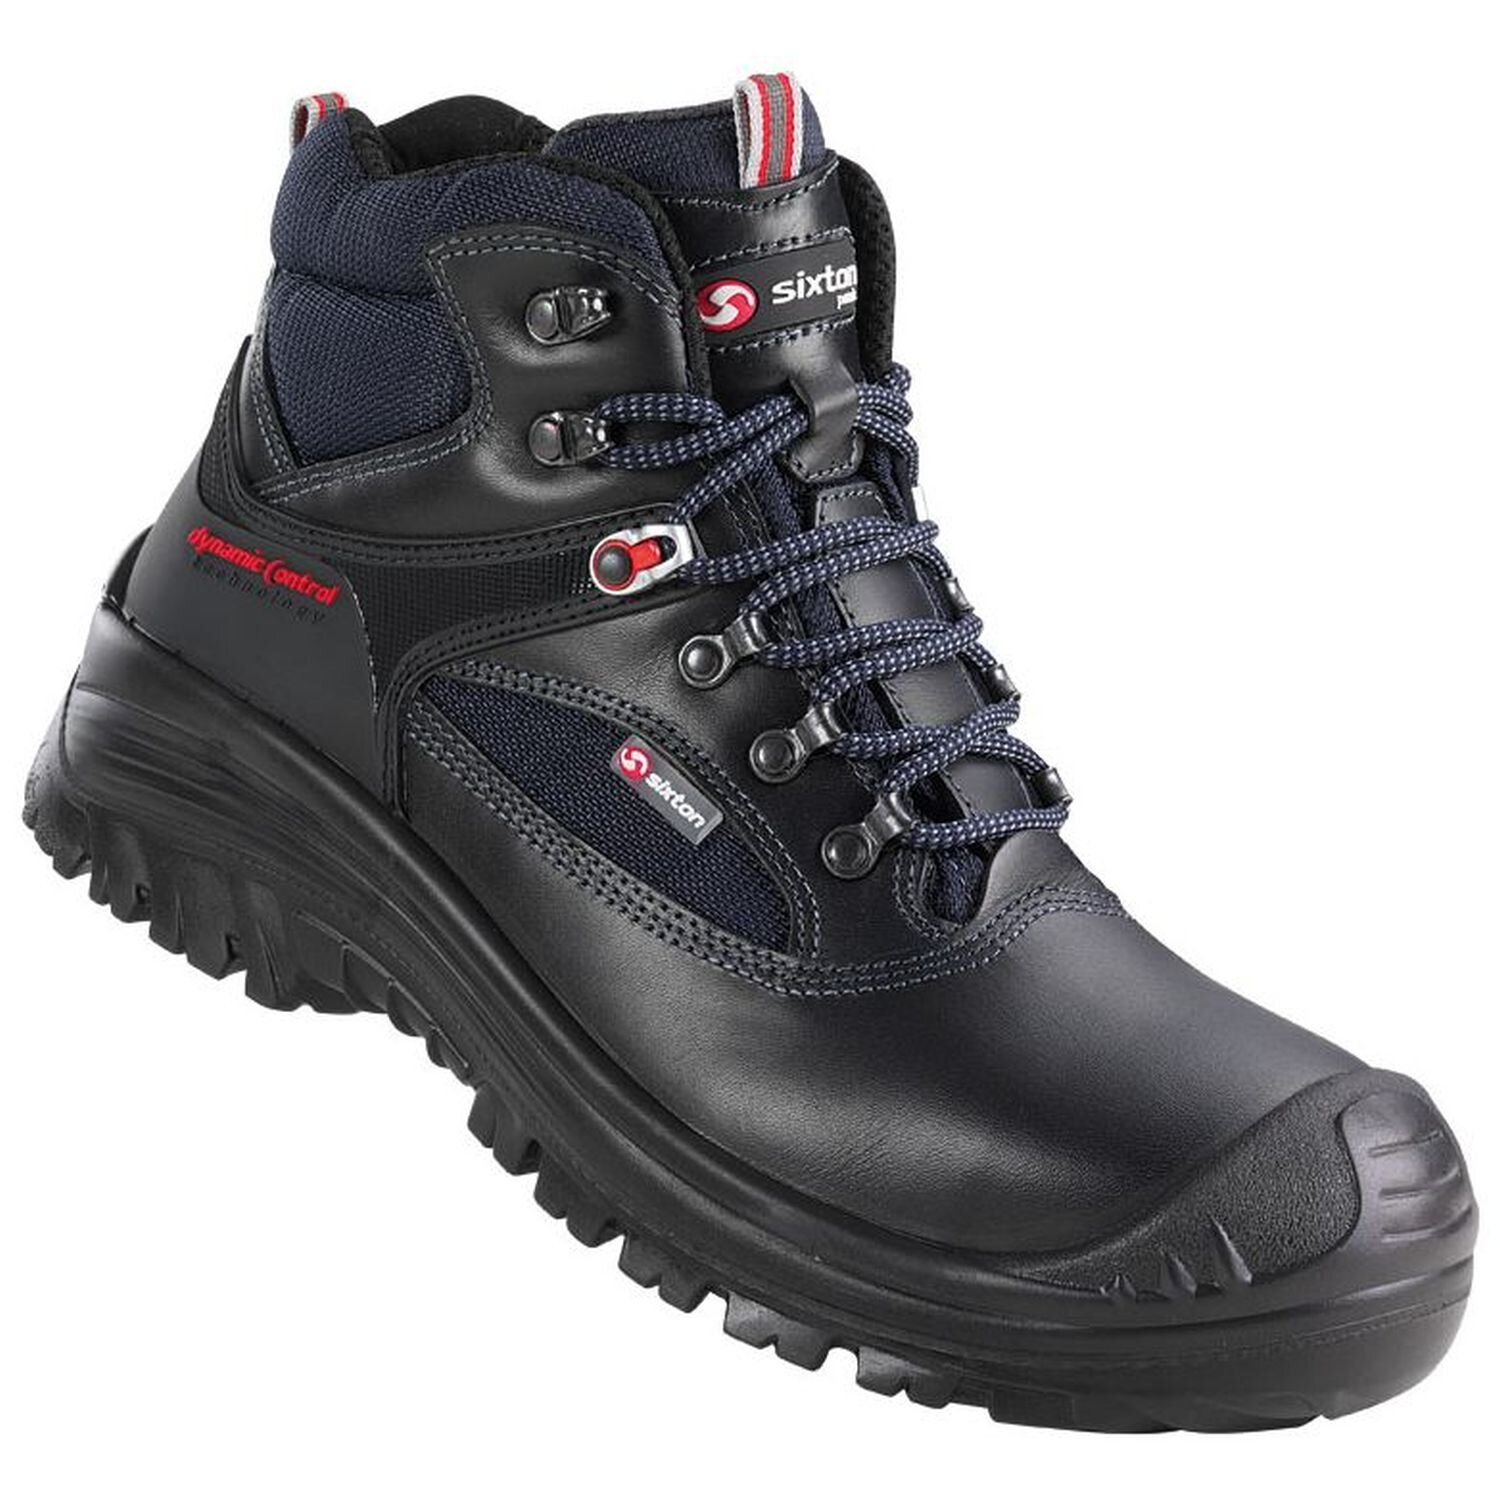 Sixton Peak Steppa Anti-Penetration Midsole Lace Up Ankle Safety Boot